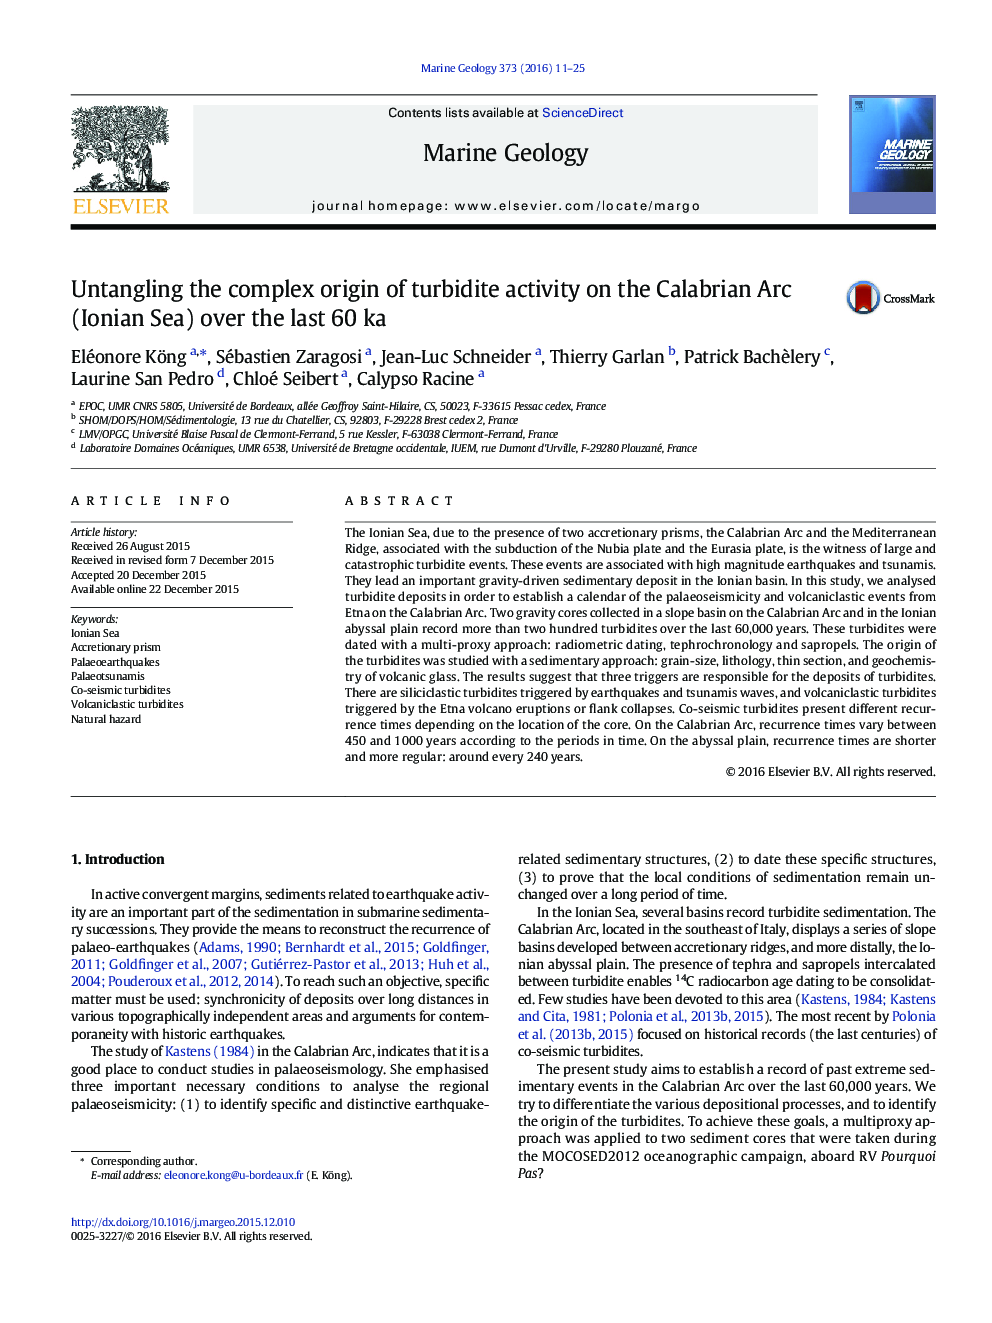 Untangling the complex origin of turbidite activity on the Calabrian Arc (Ionian Sea) over the last 60 ka